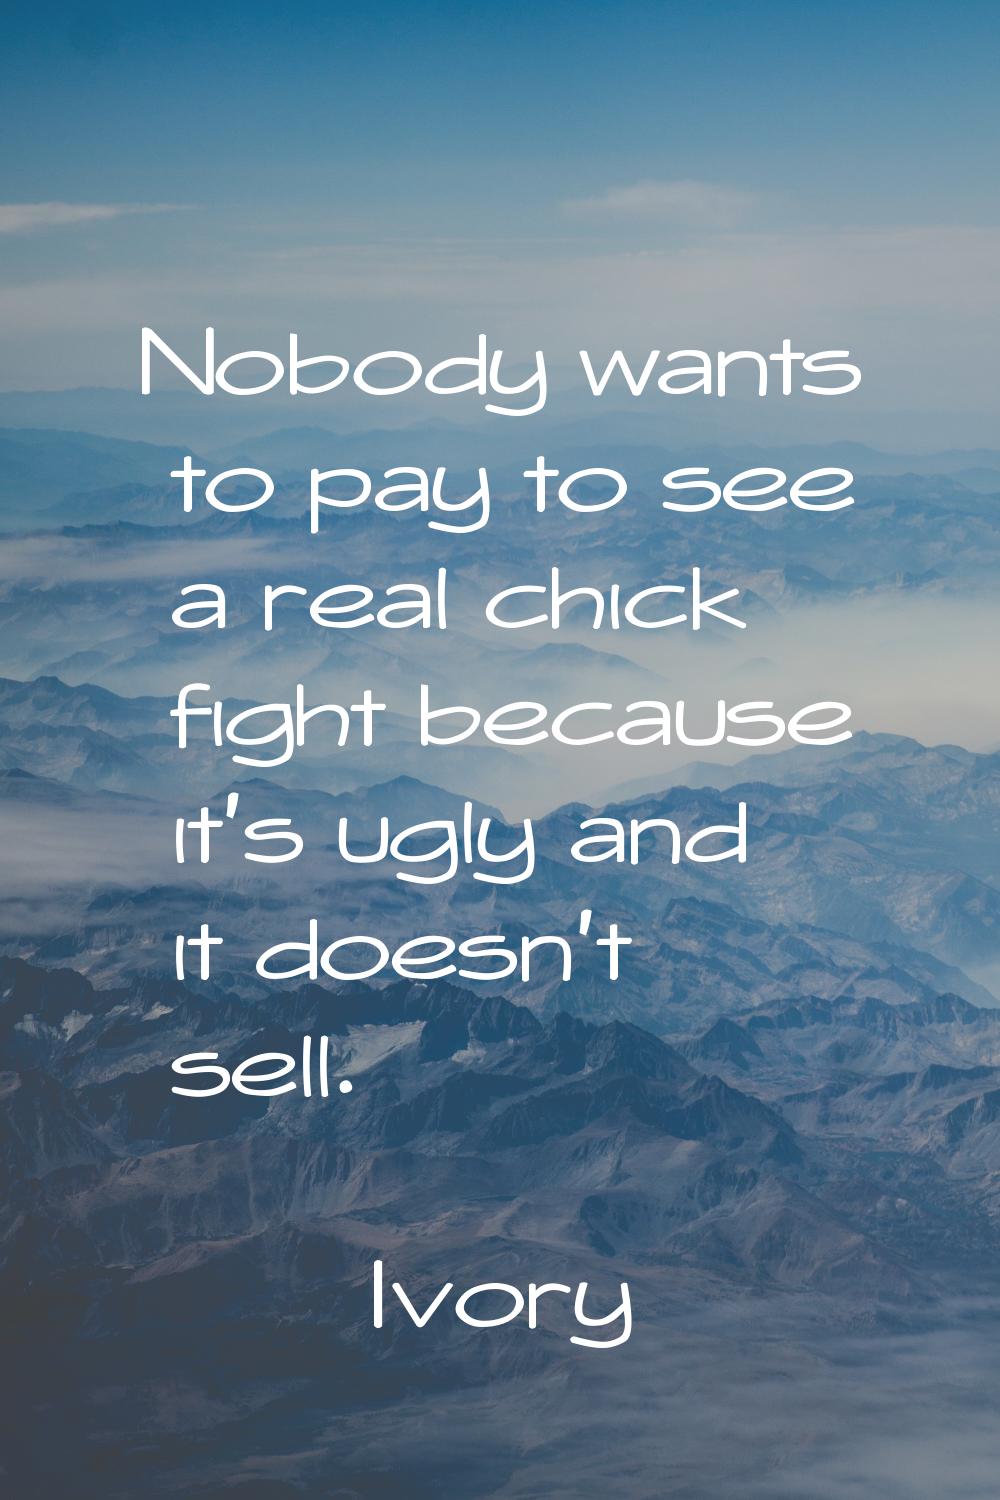 Nobody wants to pay to see a real chick fight because it's ugly and it doesn't sell.